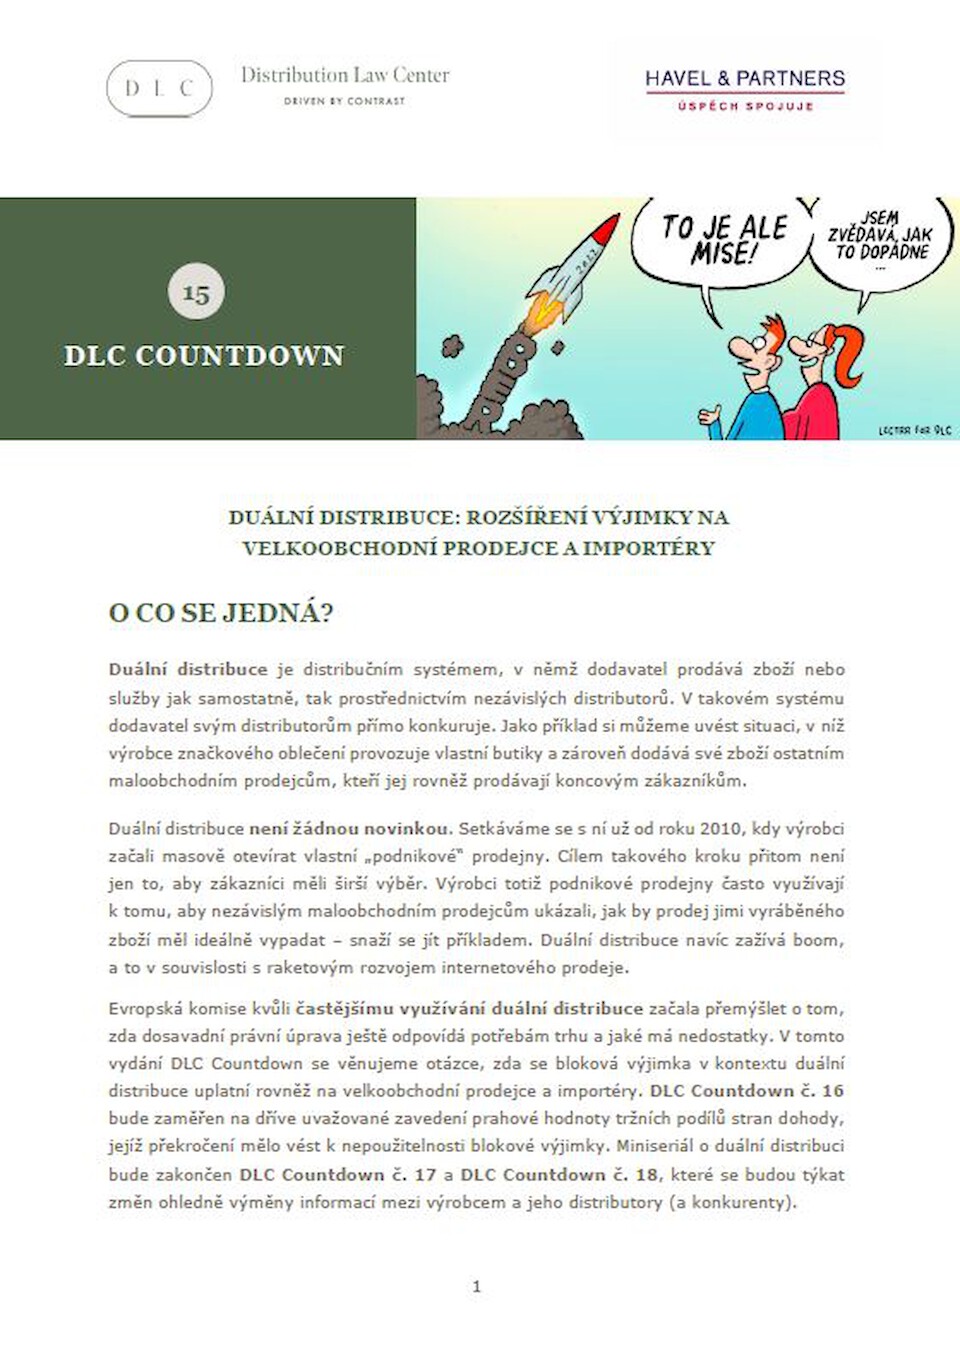 Distribution Law Center Countdown XV - Dual distribution (Extension of exception to wholesalers and importers)